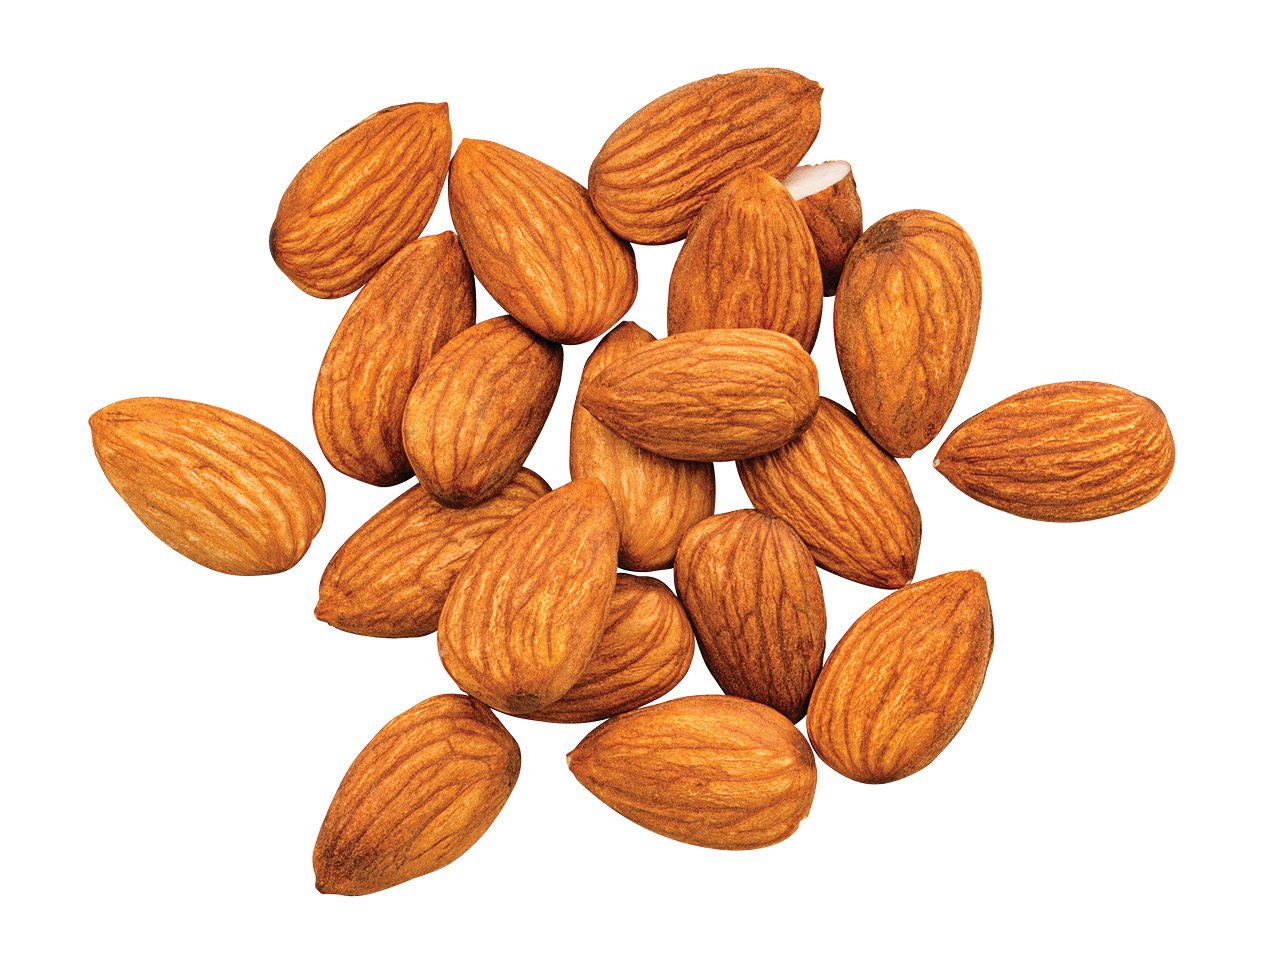 A handful of whole almonds against a white background